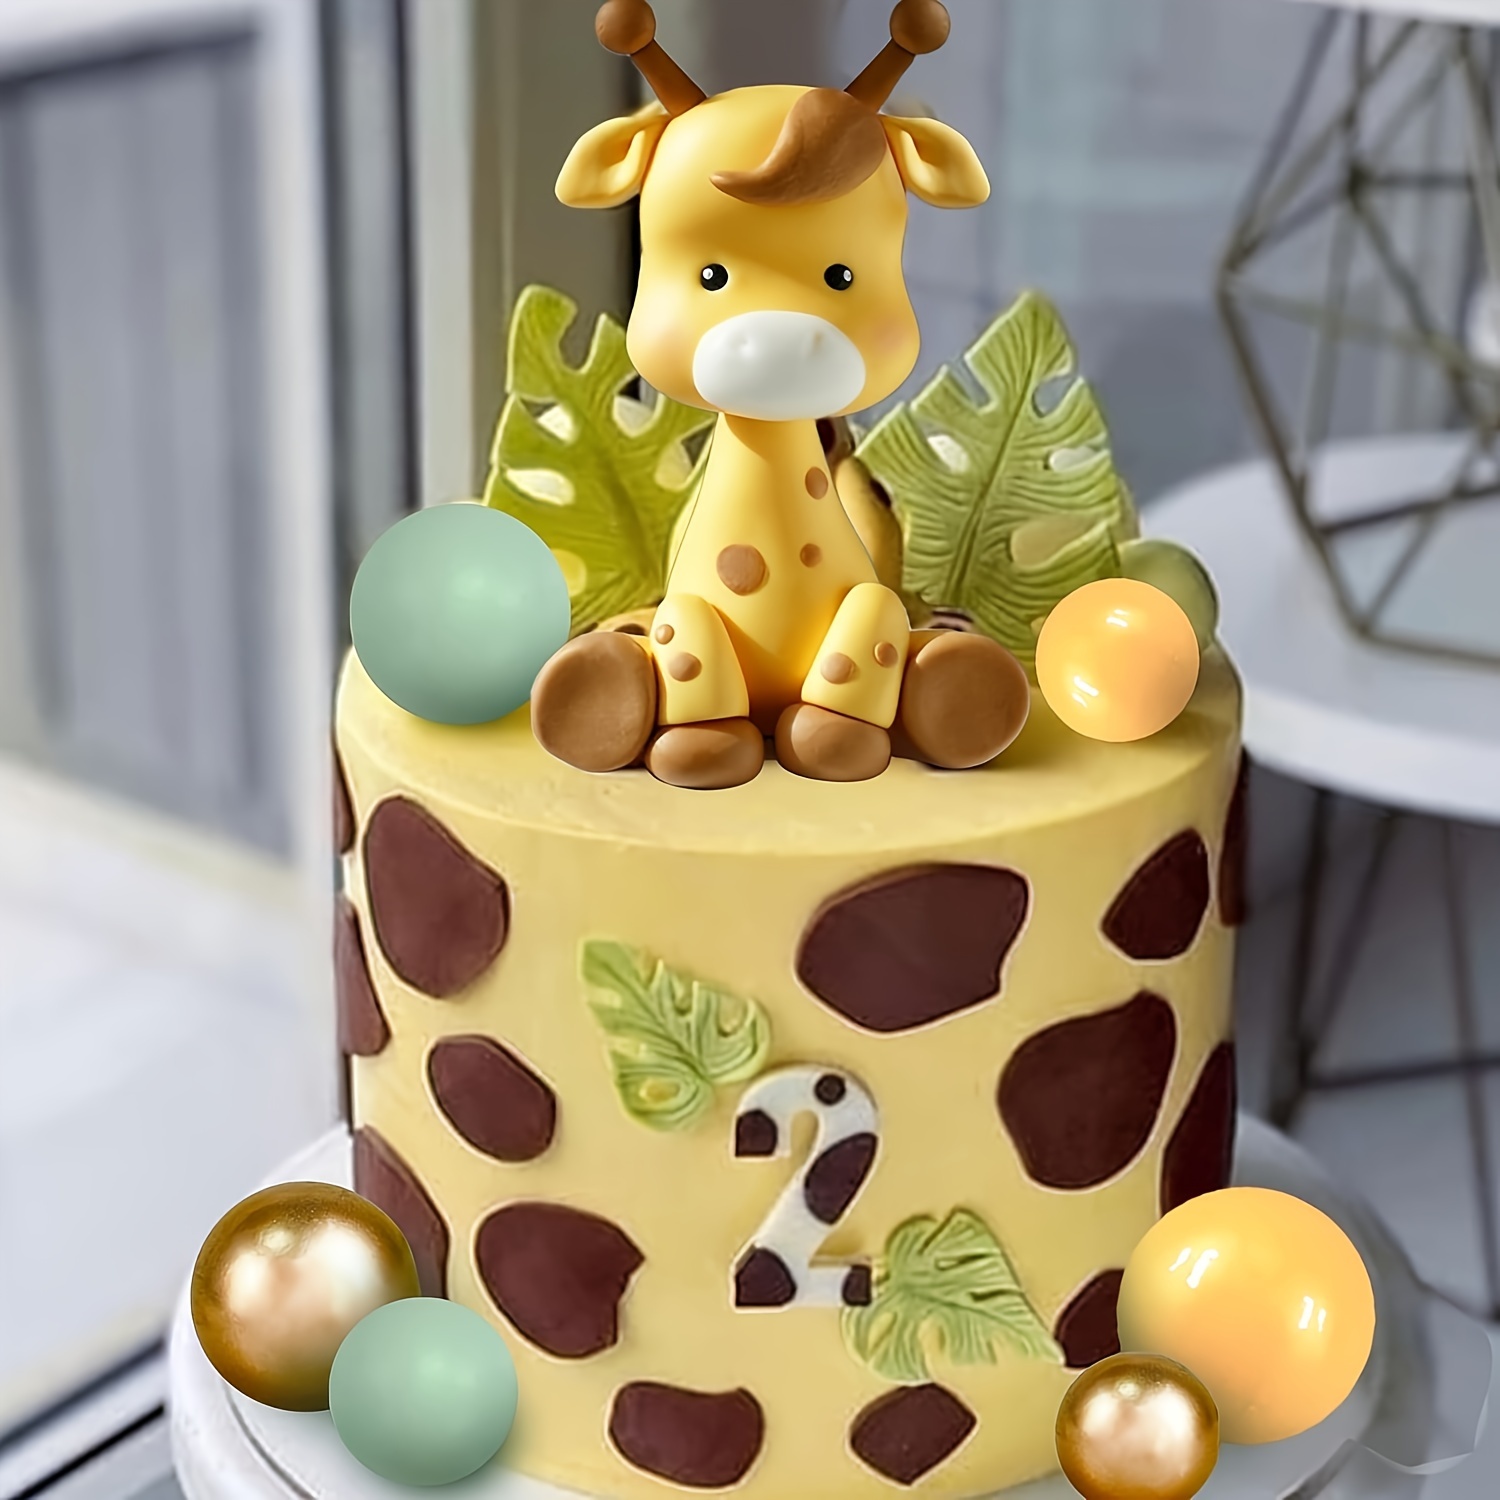 

17pcs, Giraffe Cake Topper With Balls Cake Decorations For Wild Animals Themed Birthday Baby Shower Party Supplies